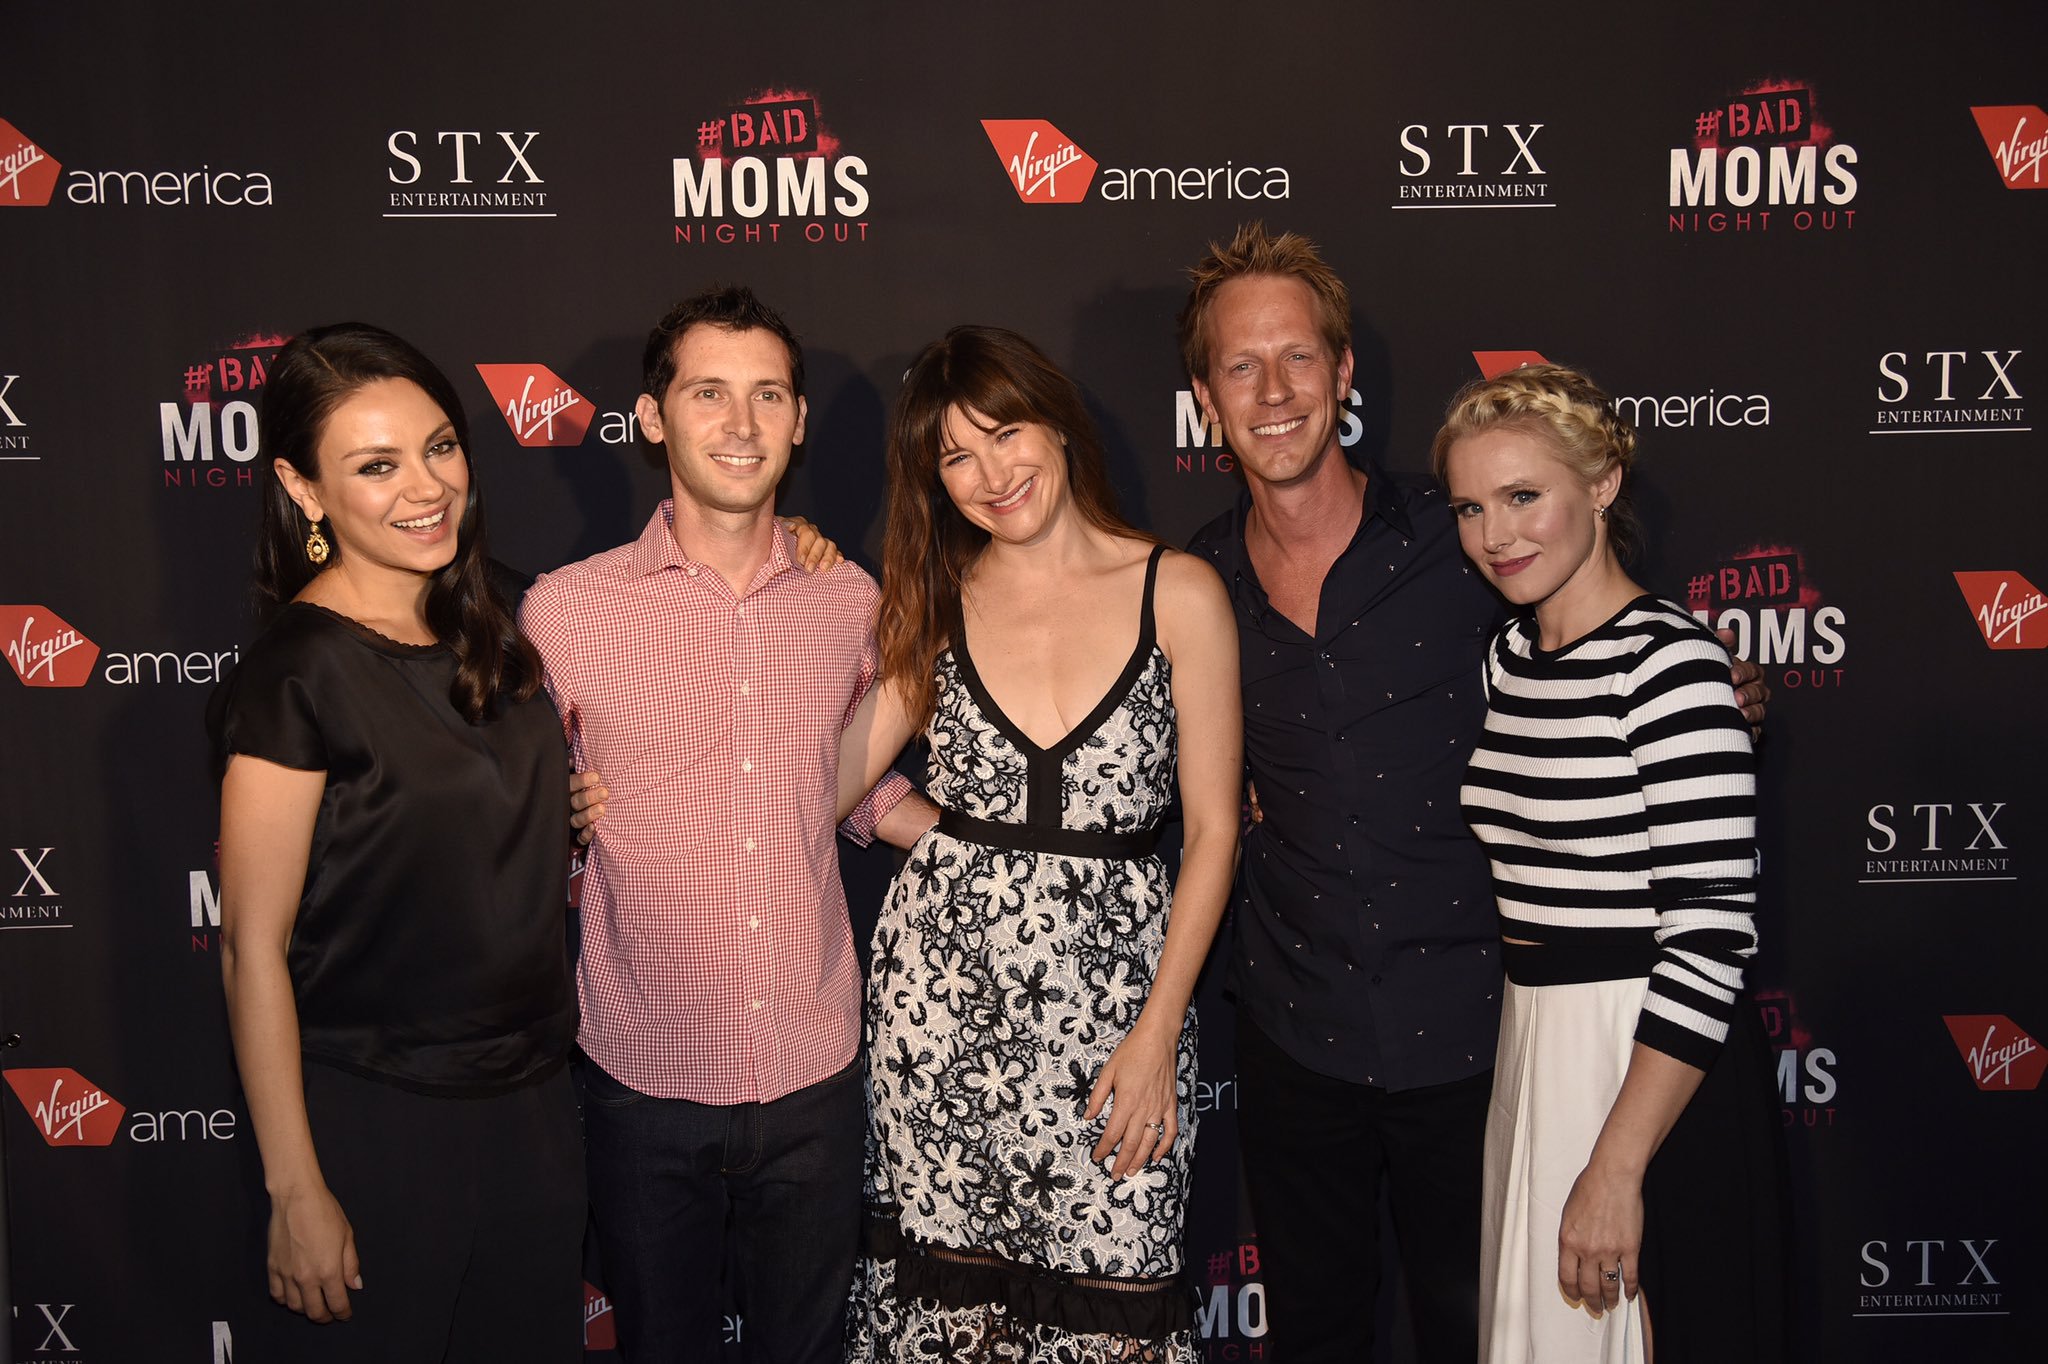 Justin Berfield and Jason Felts at the 'Bad Moms' movie premiere party